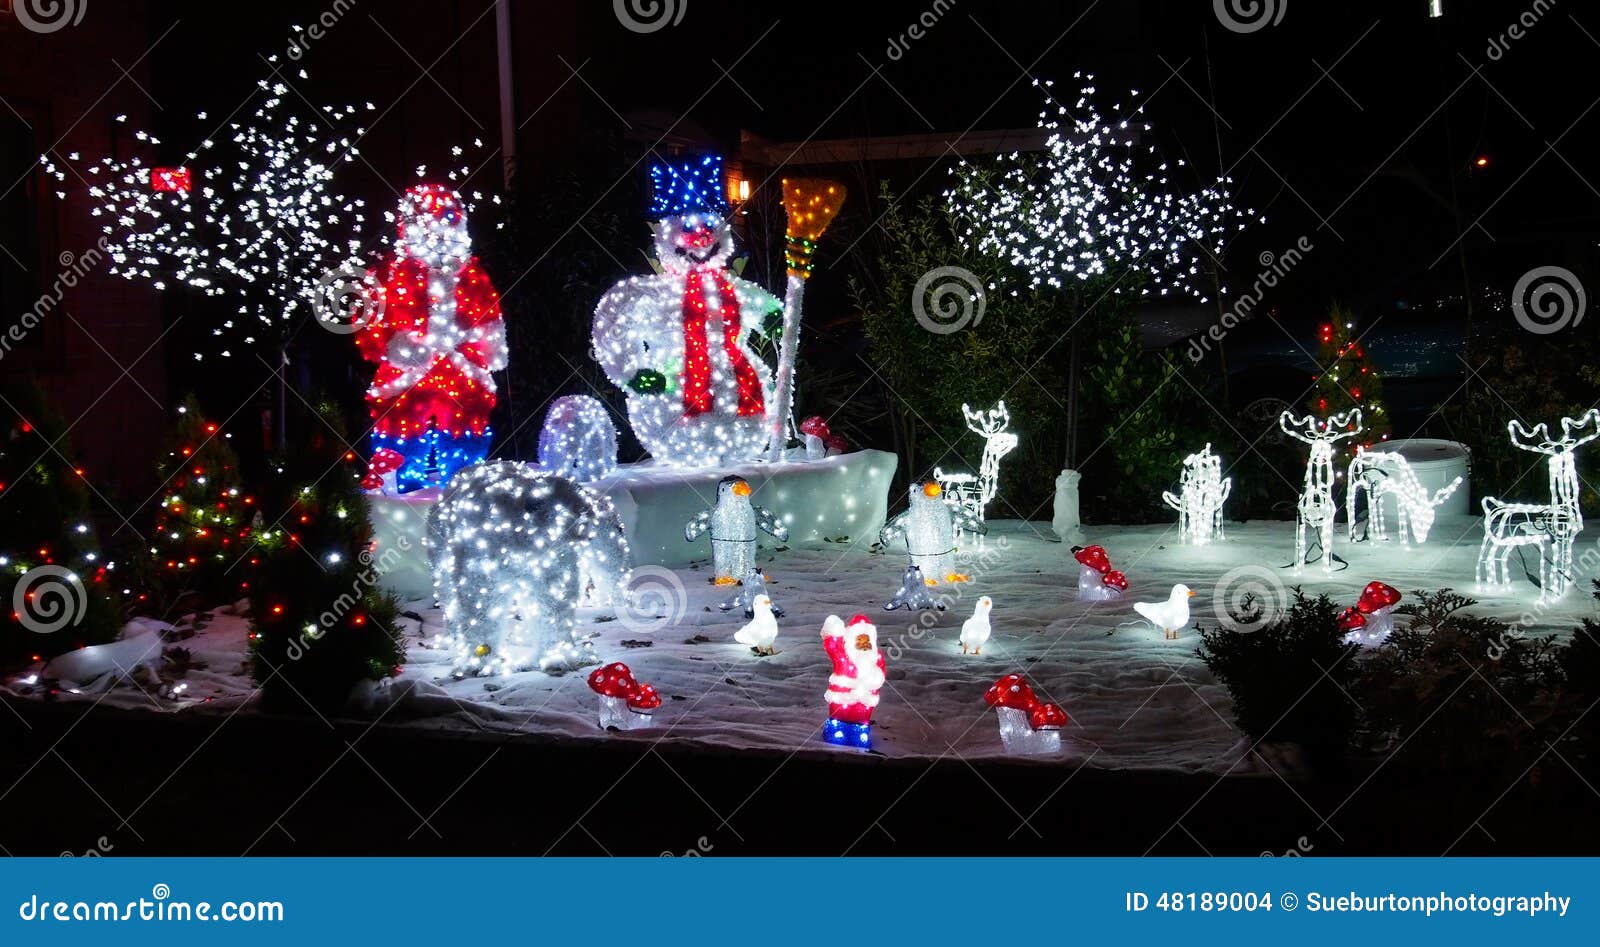 Xmas decorations  editorial stock image Image of event 